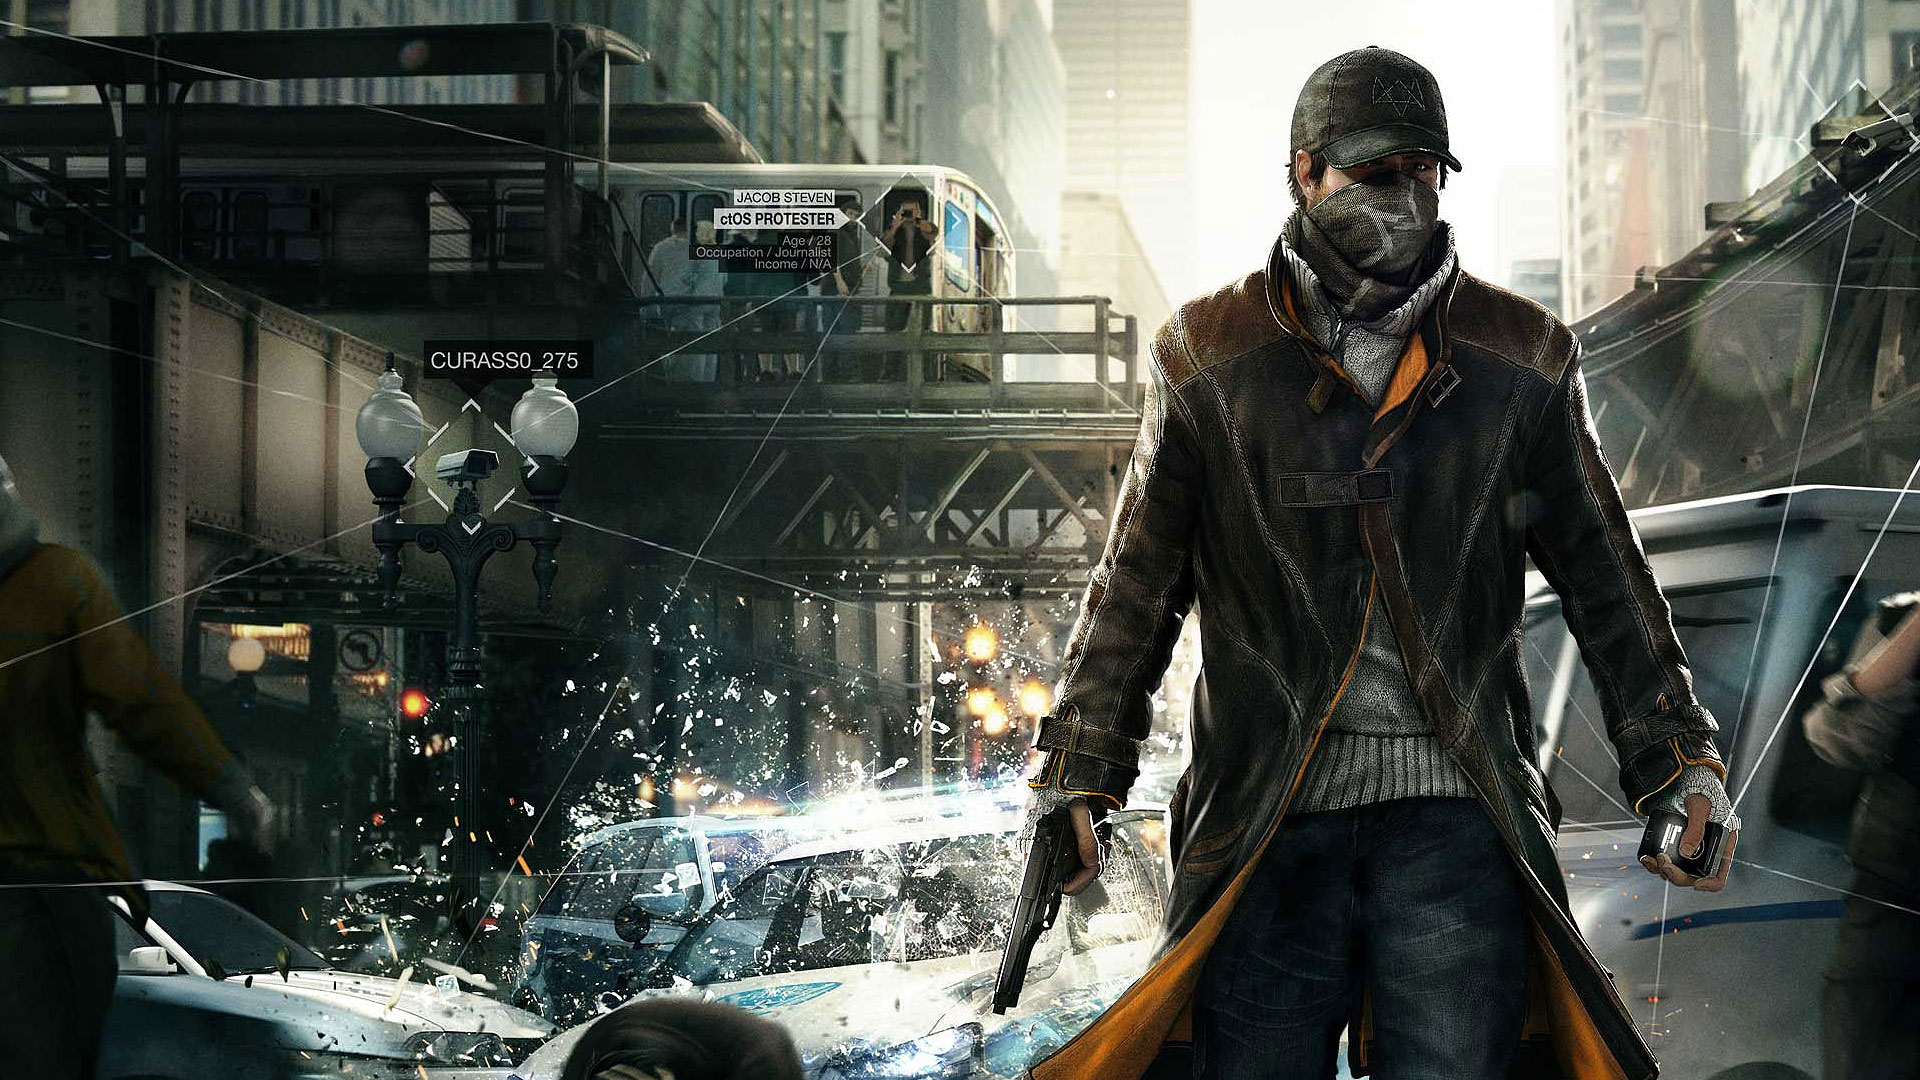 Geek insider, geekinsider, geekinsider. Com,, review: watch dogs (it's not a hack job), gaming